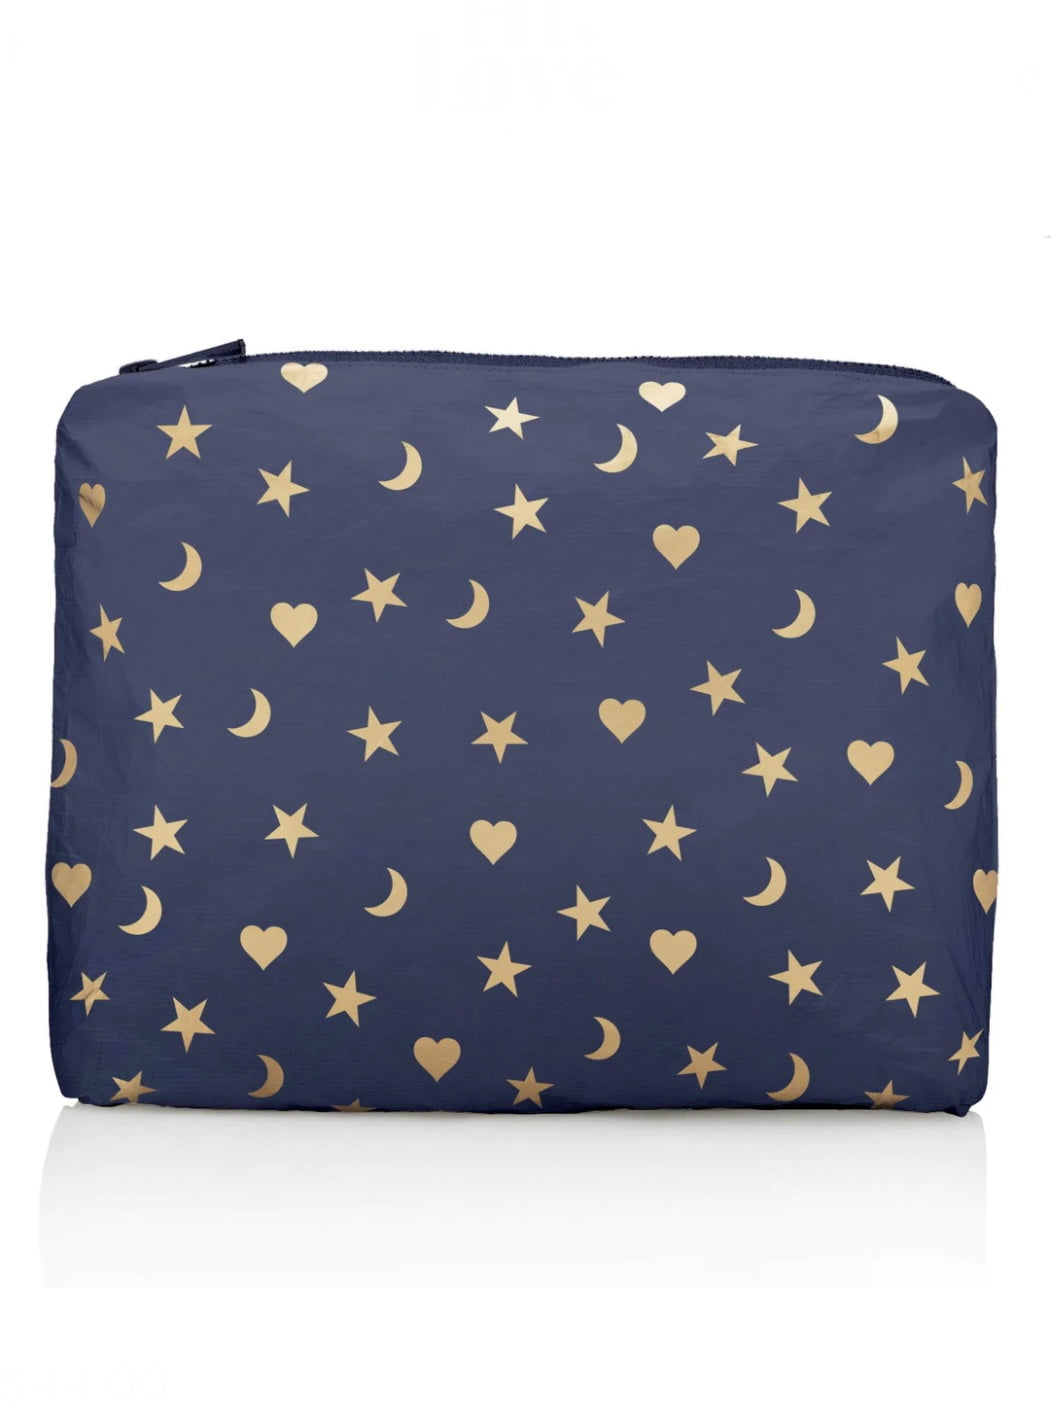 Hi Love Travel Matte Navy Medium Pouch with Silver Hearts Moons and Stars